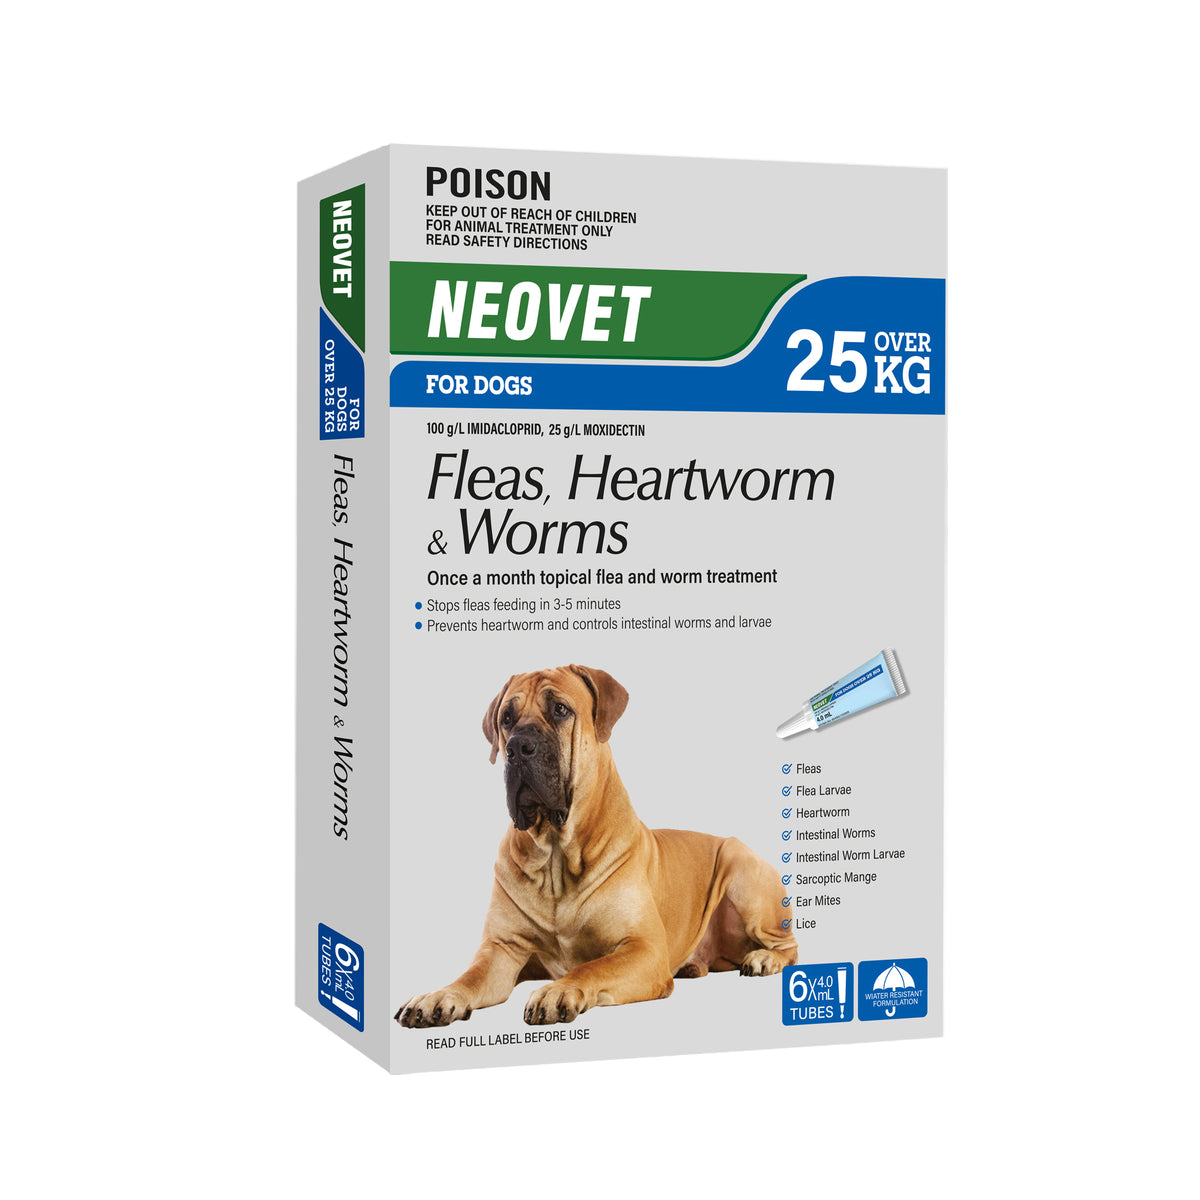 Neovet For Dogs (Fleas, Heartworm &amp; Worms) over 25kg